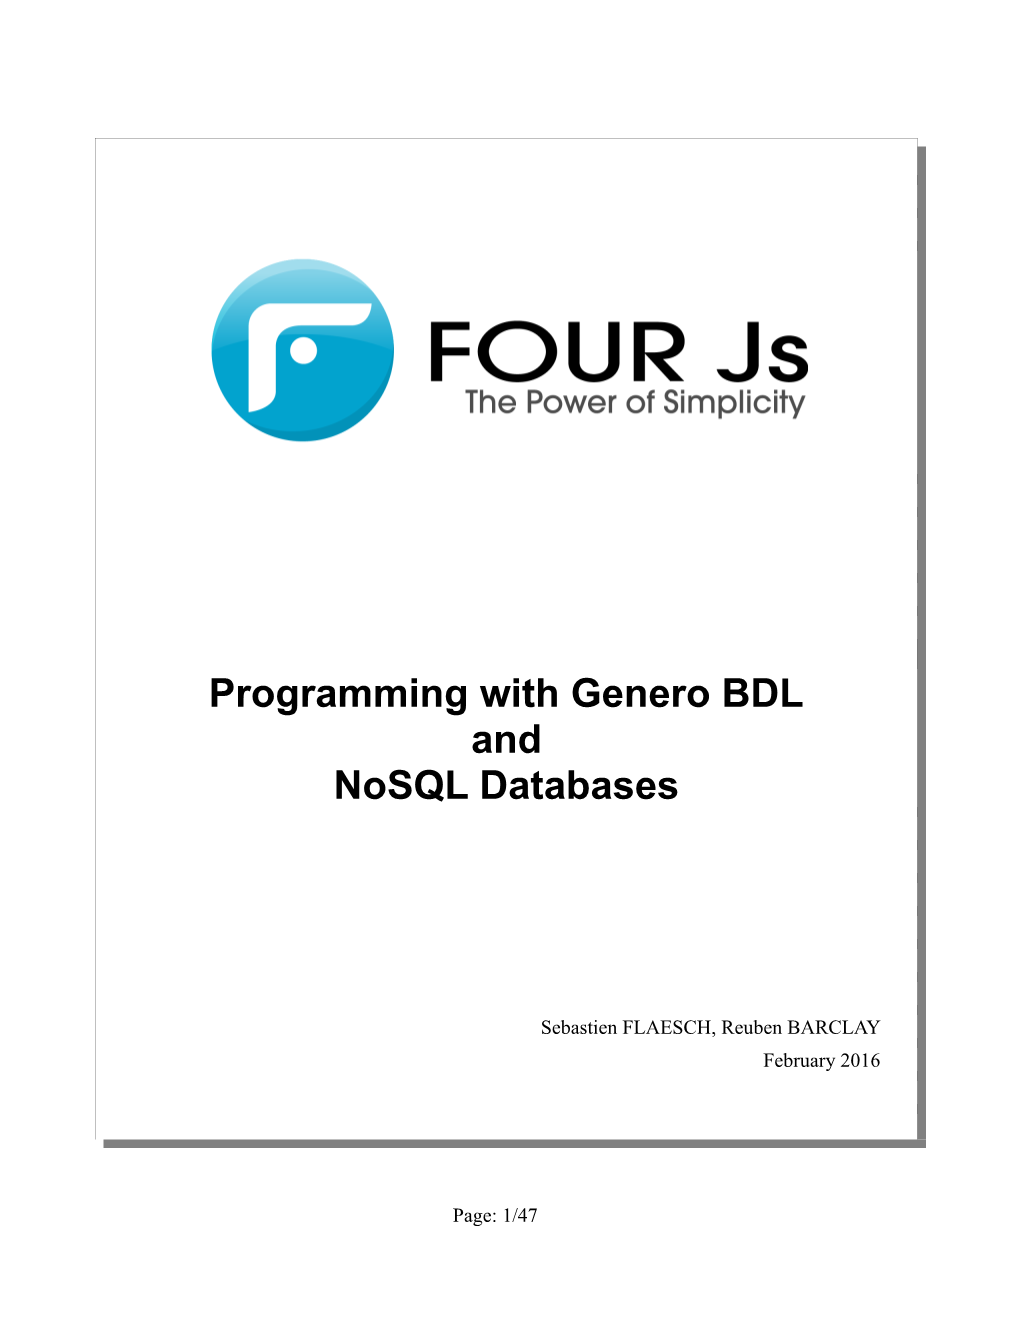 Programming with Genero BDL and Nosql Databases